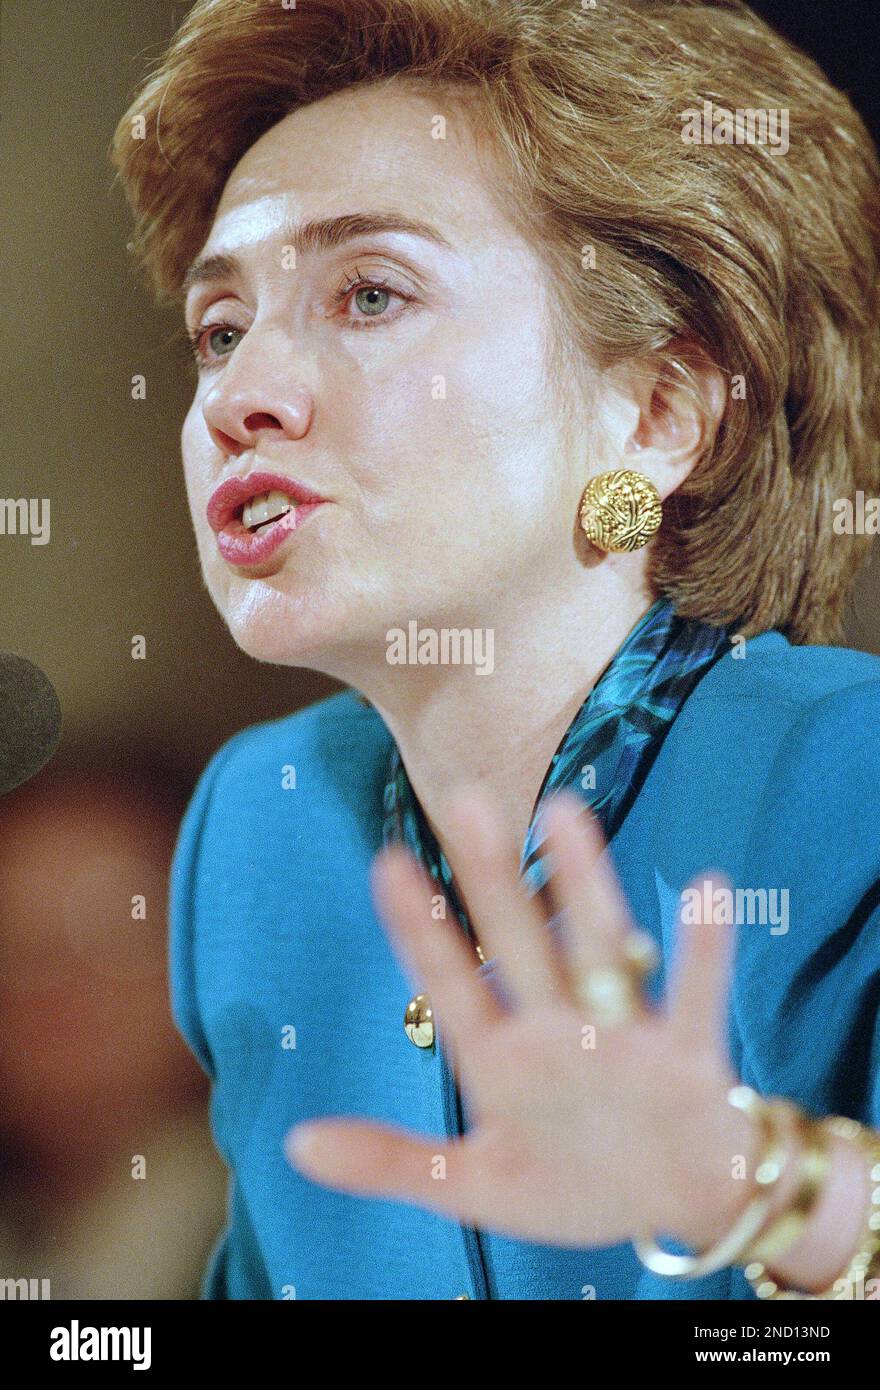 First lady Hillary Rodham Clinton gestures while testifying on Capitol Hill in Washington on Wednesday, Sept. 29, 1993, before the Senate Labor Committee which was holding hearings on health care reform. Mrs. Clinton told the committee that the Clinton Administration health plan will make American workers both more secure and productive and ease families’ fears that “the future is closing in on them”. (AP Photo/Doug Mills) Stock Photo